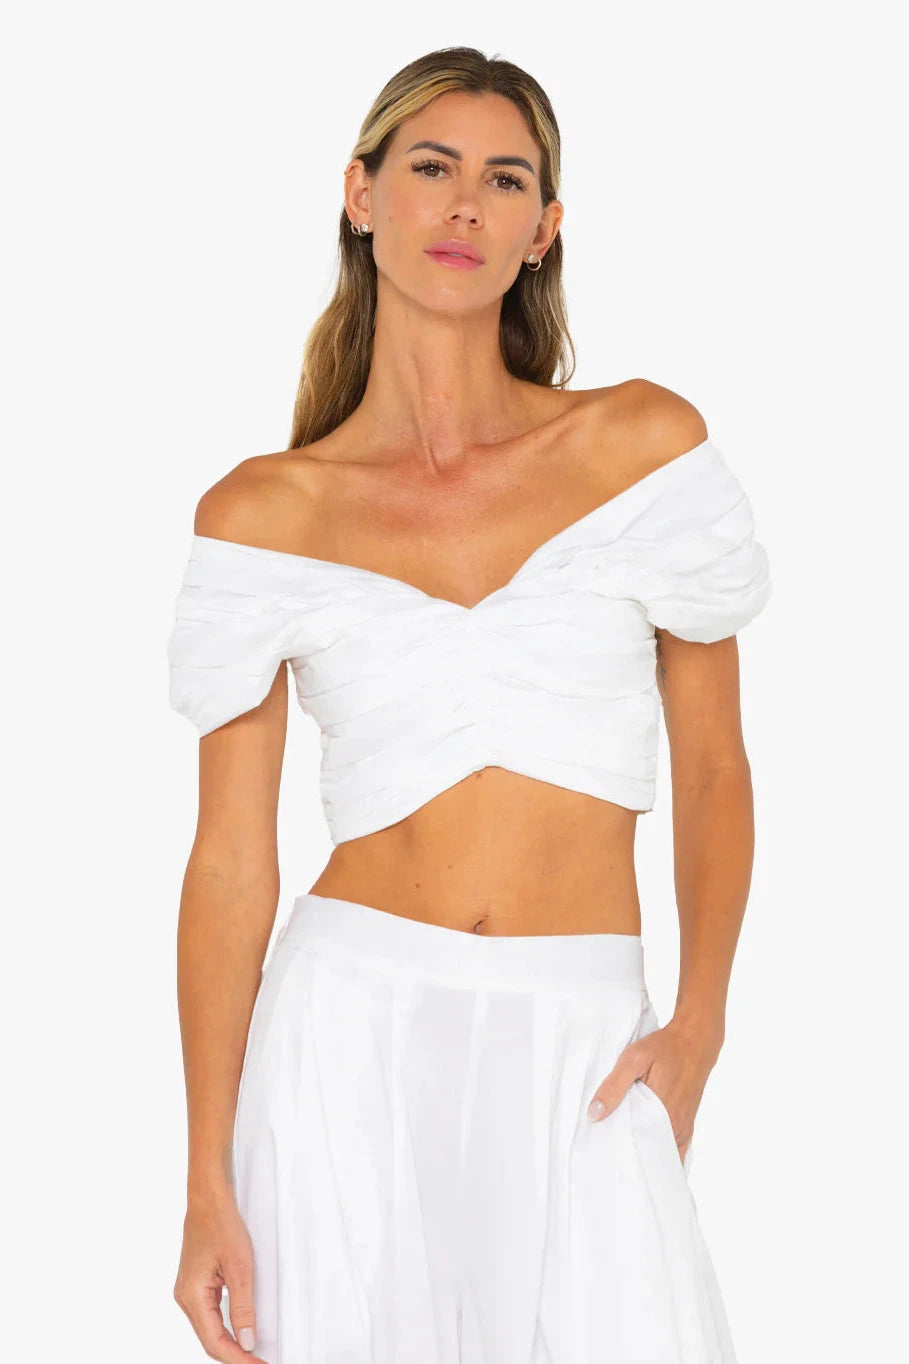 JUST BE QUEEN ROSE CROP TOP IN WHITE